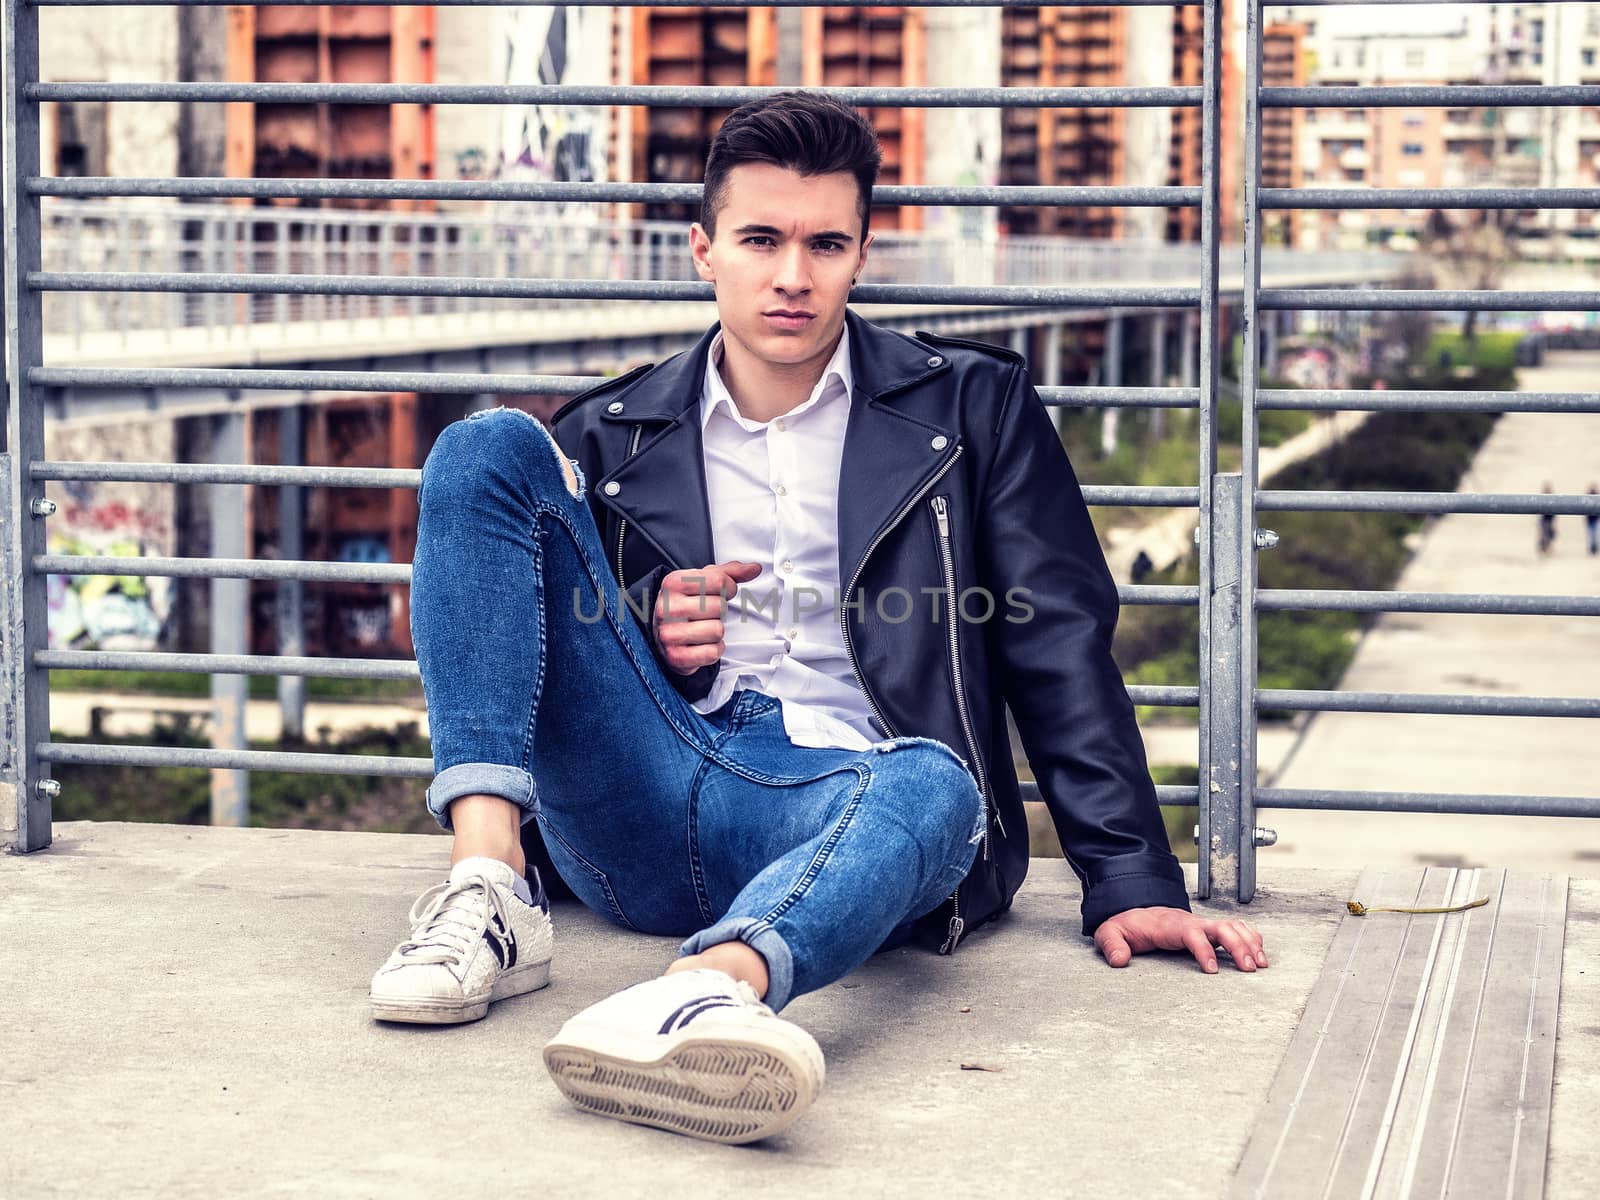 One handsome young man in urban setting by artofphoto